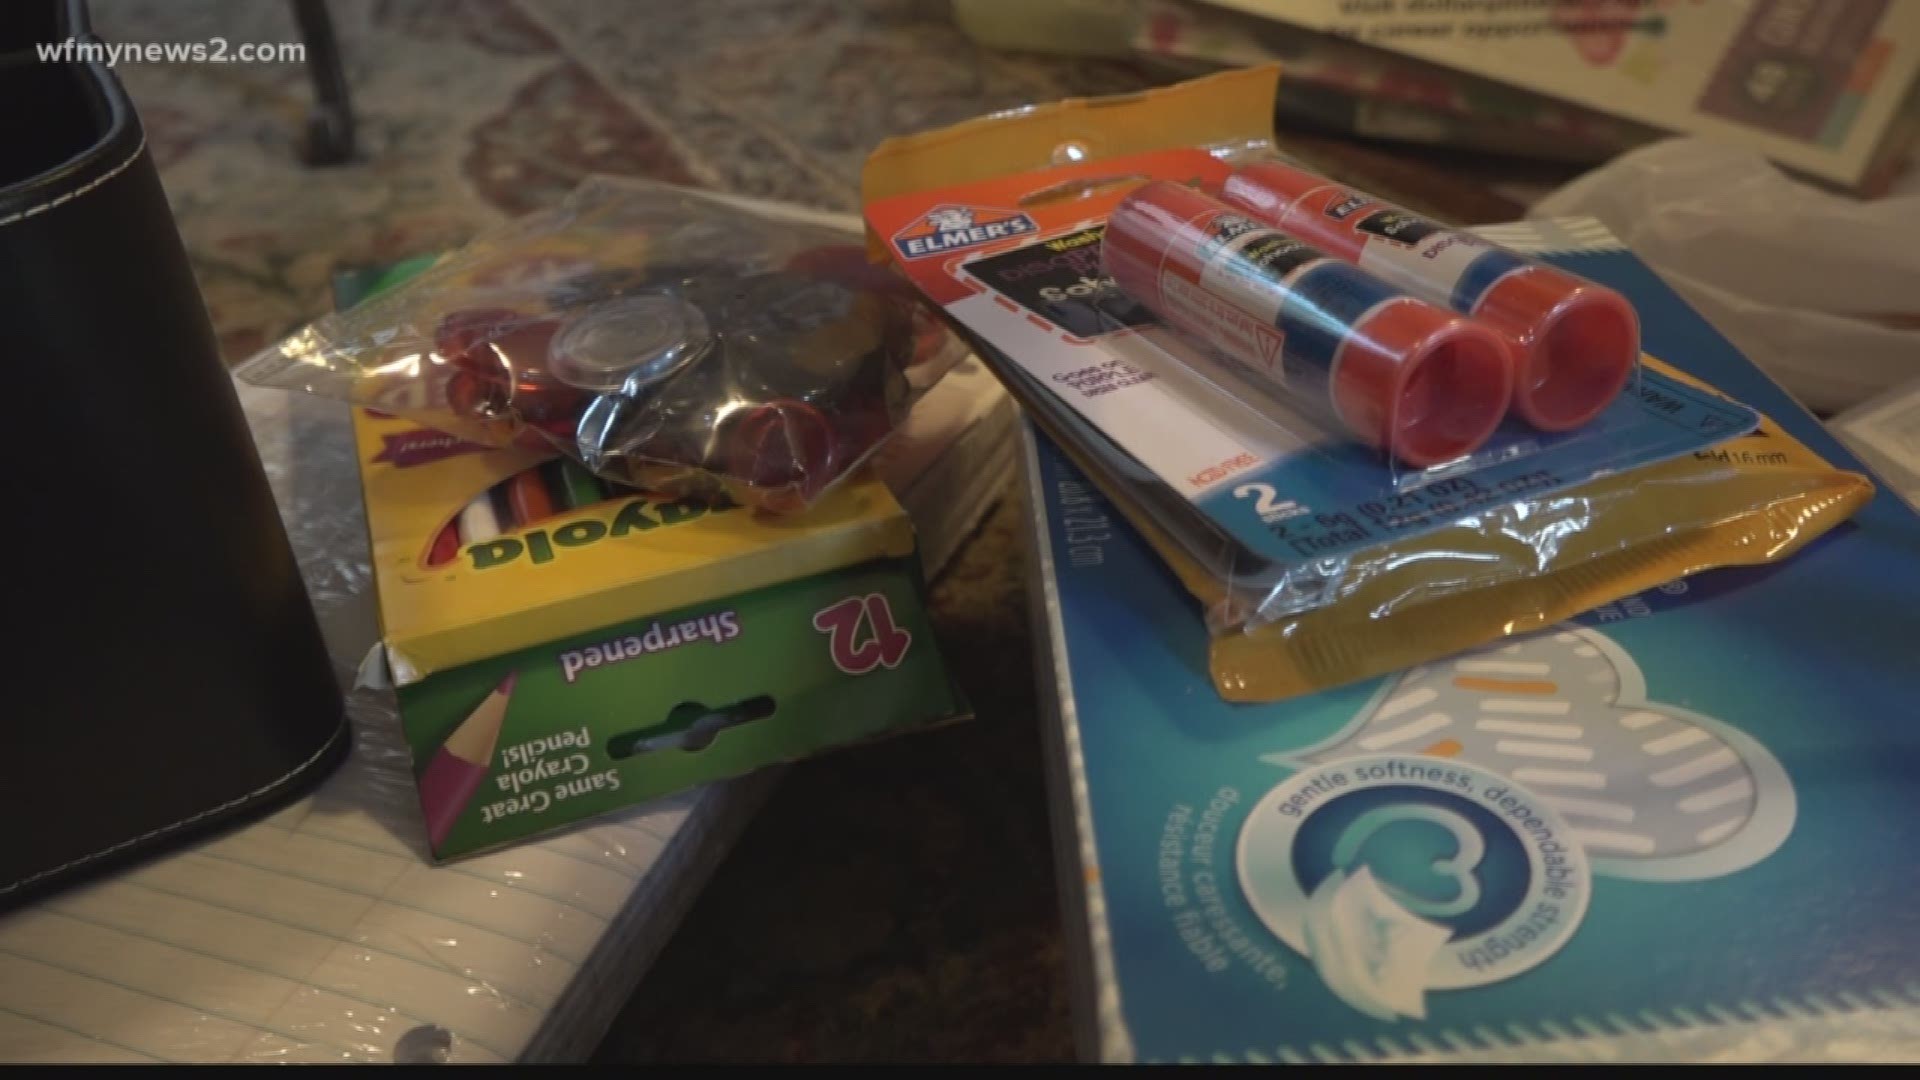 13-Year-Old Collects Supplies For Victims